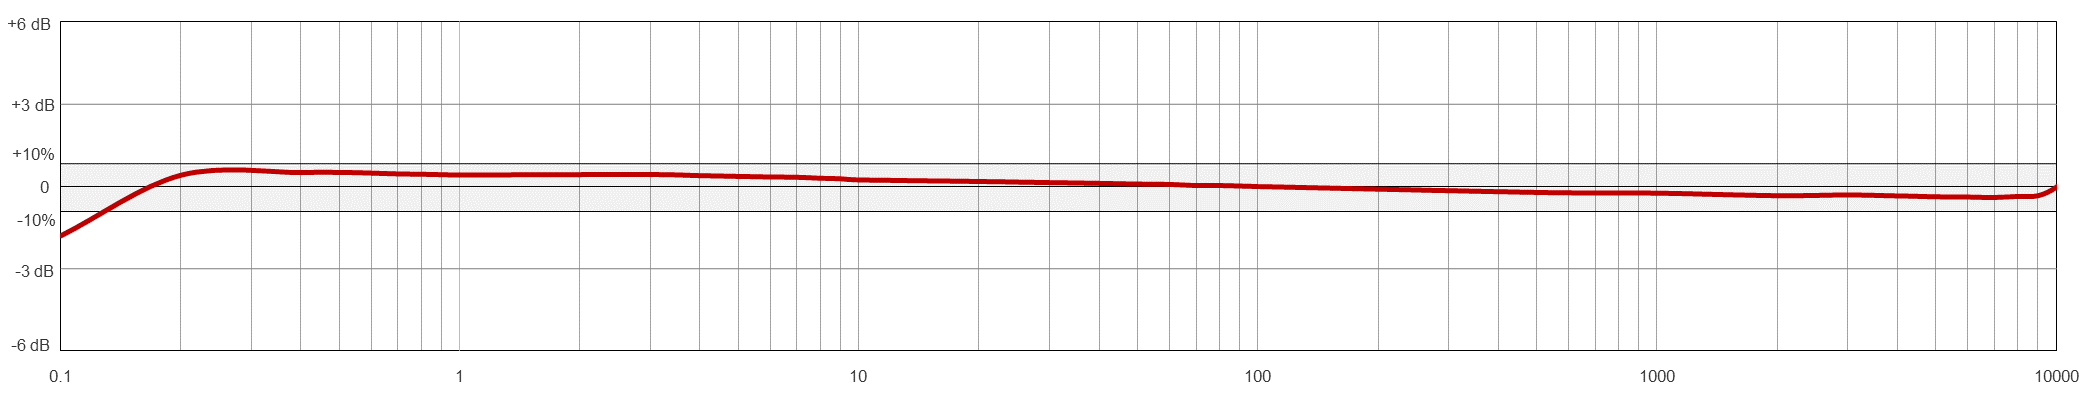 A line graph showing the frequency resopnse of a CTC AC153 condition monitoring sensor.